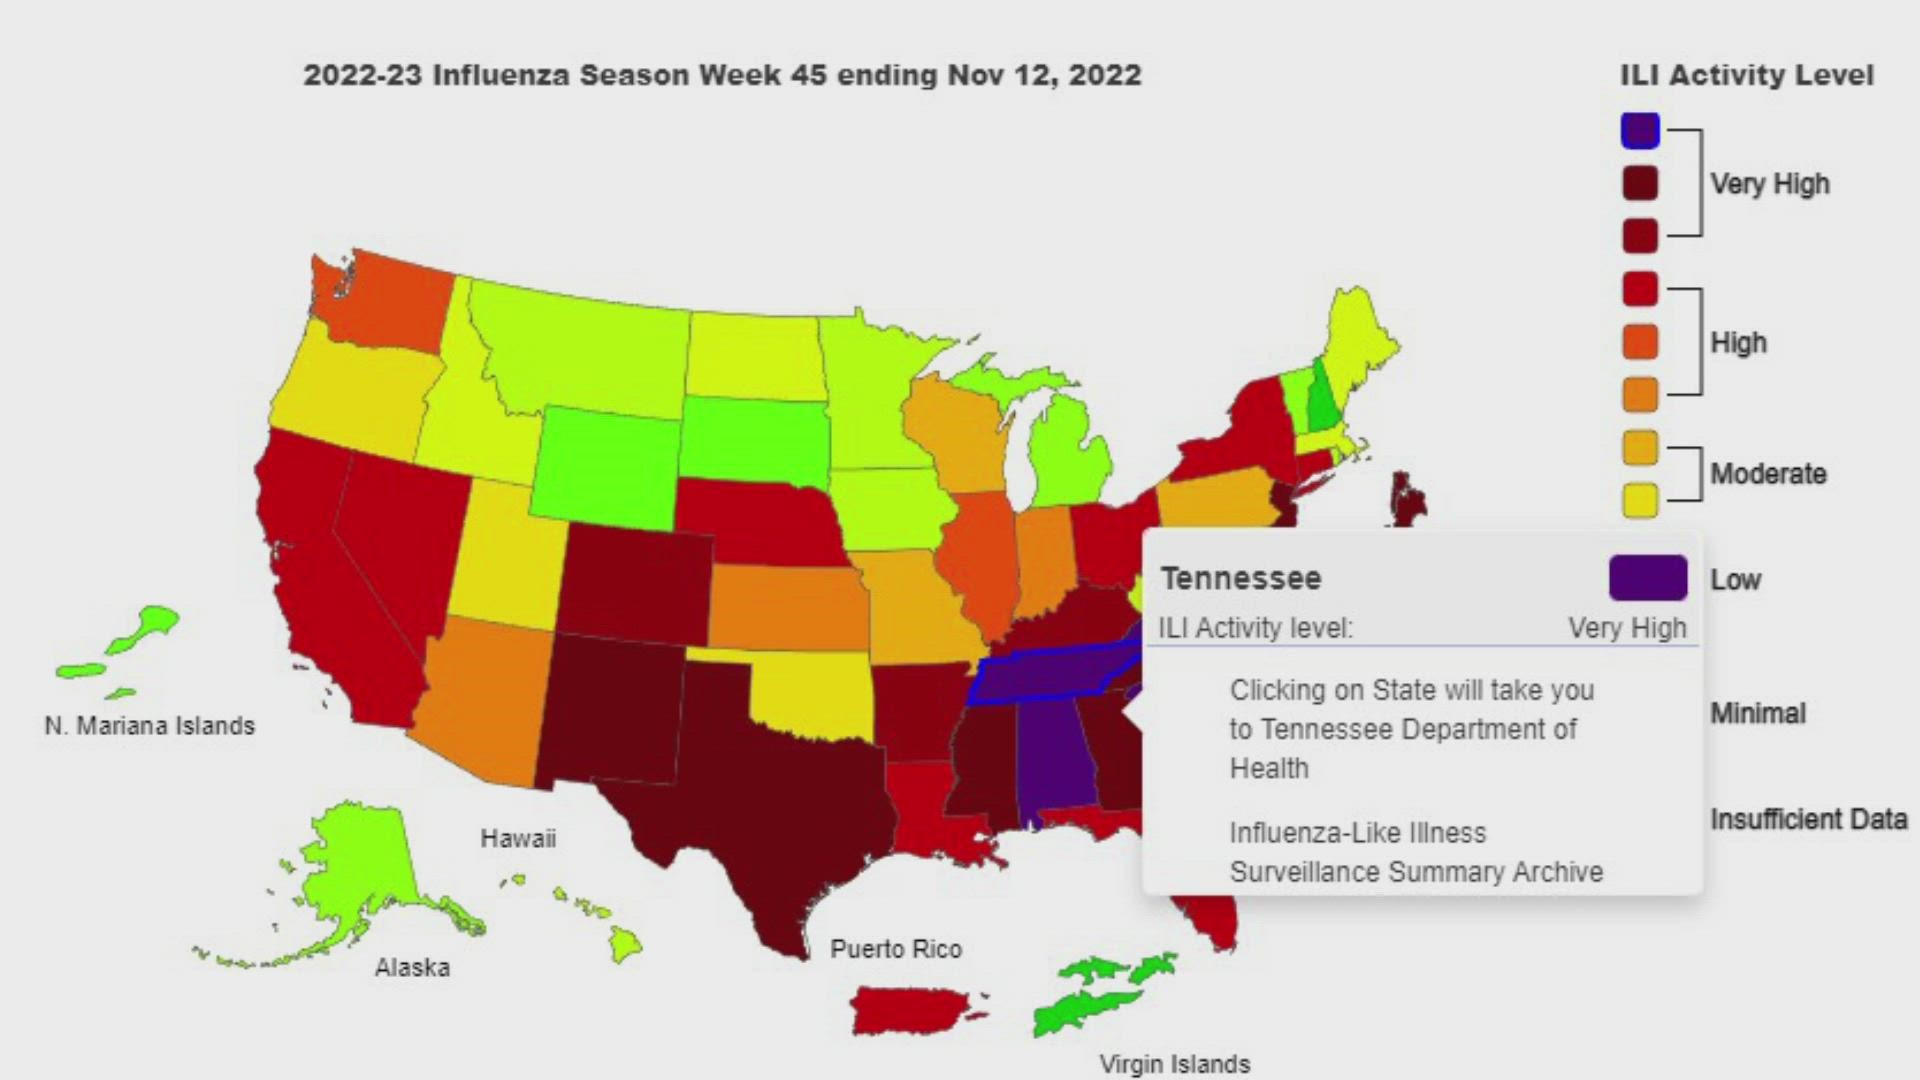 North America is seeing its worst flu season in many years, with health experts saying it appears to be the worst in more than a decade.